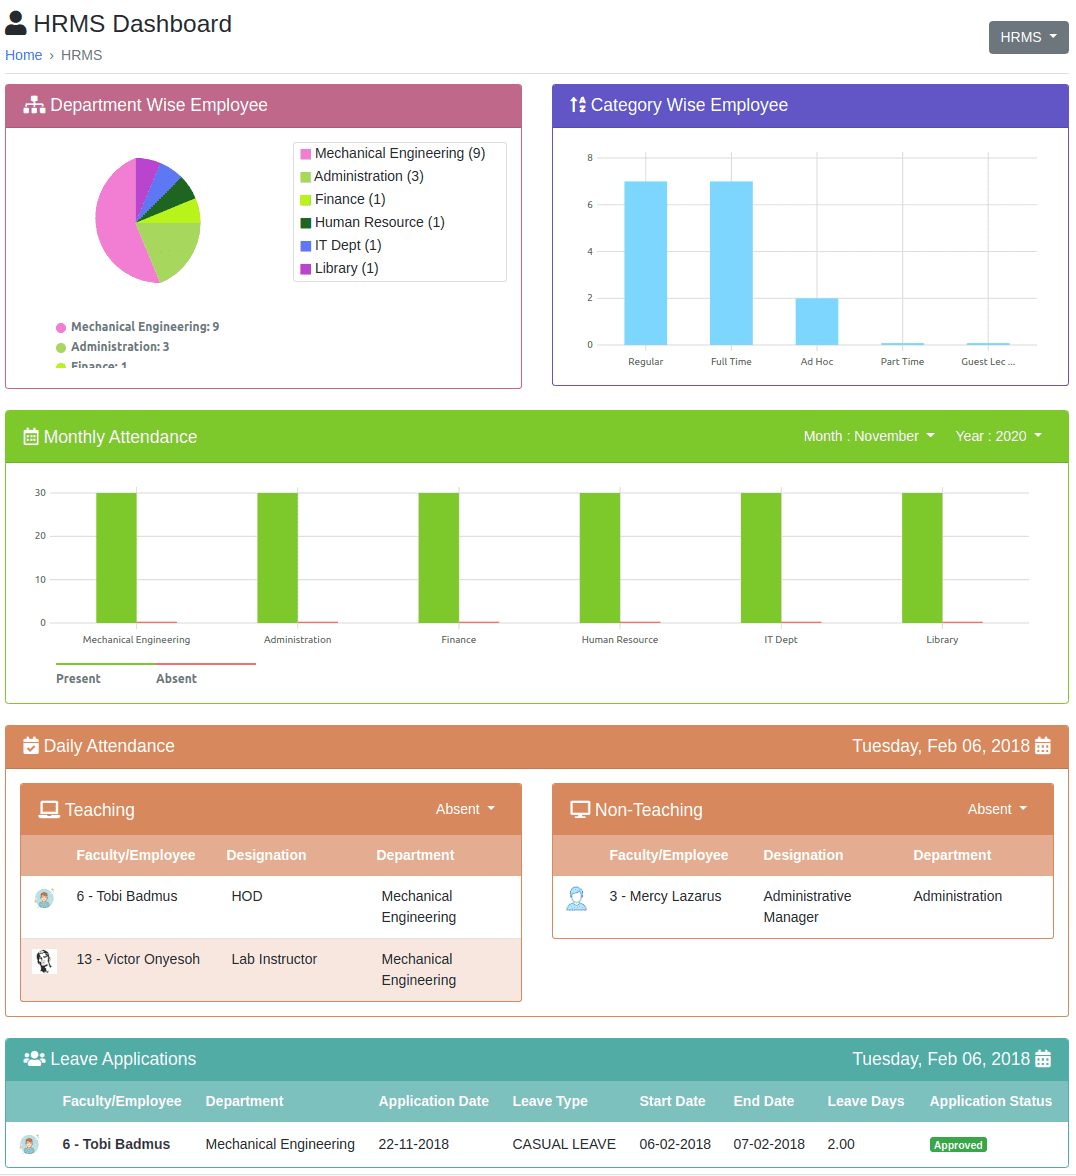 Highly Customized HRMS Dashboard